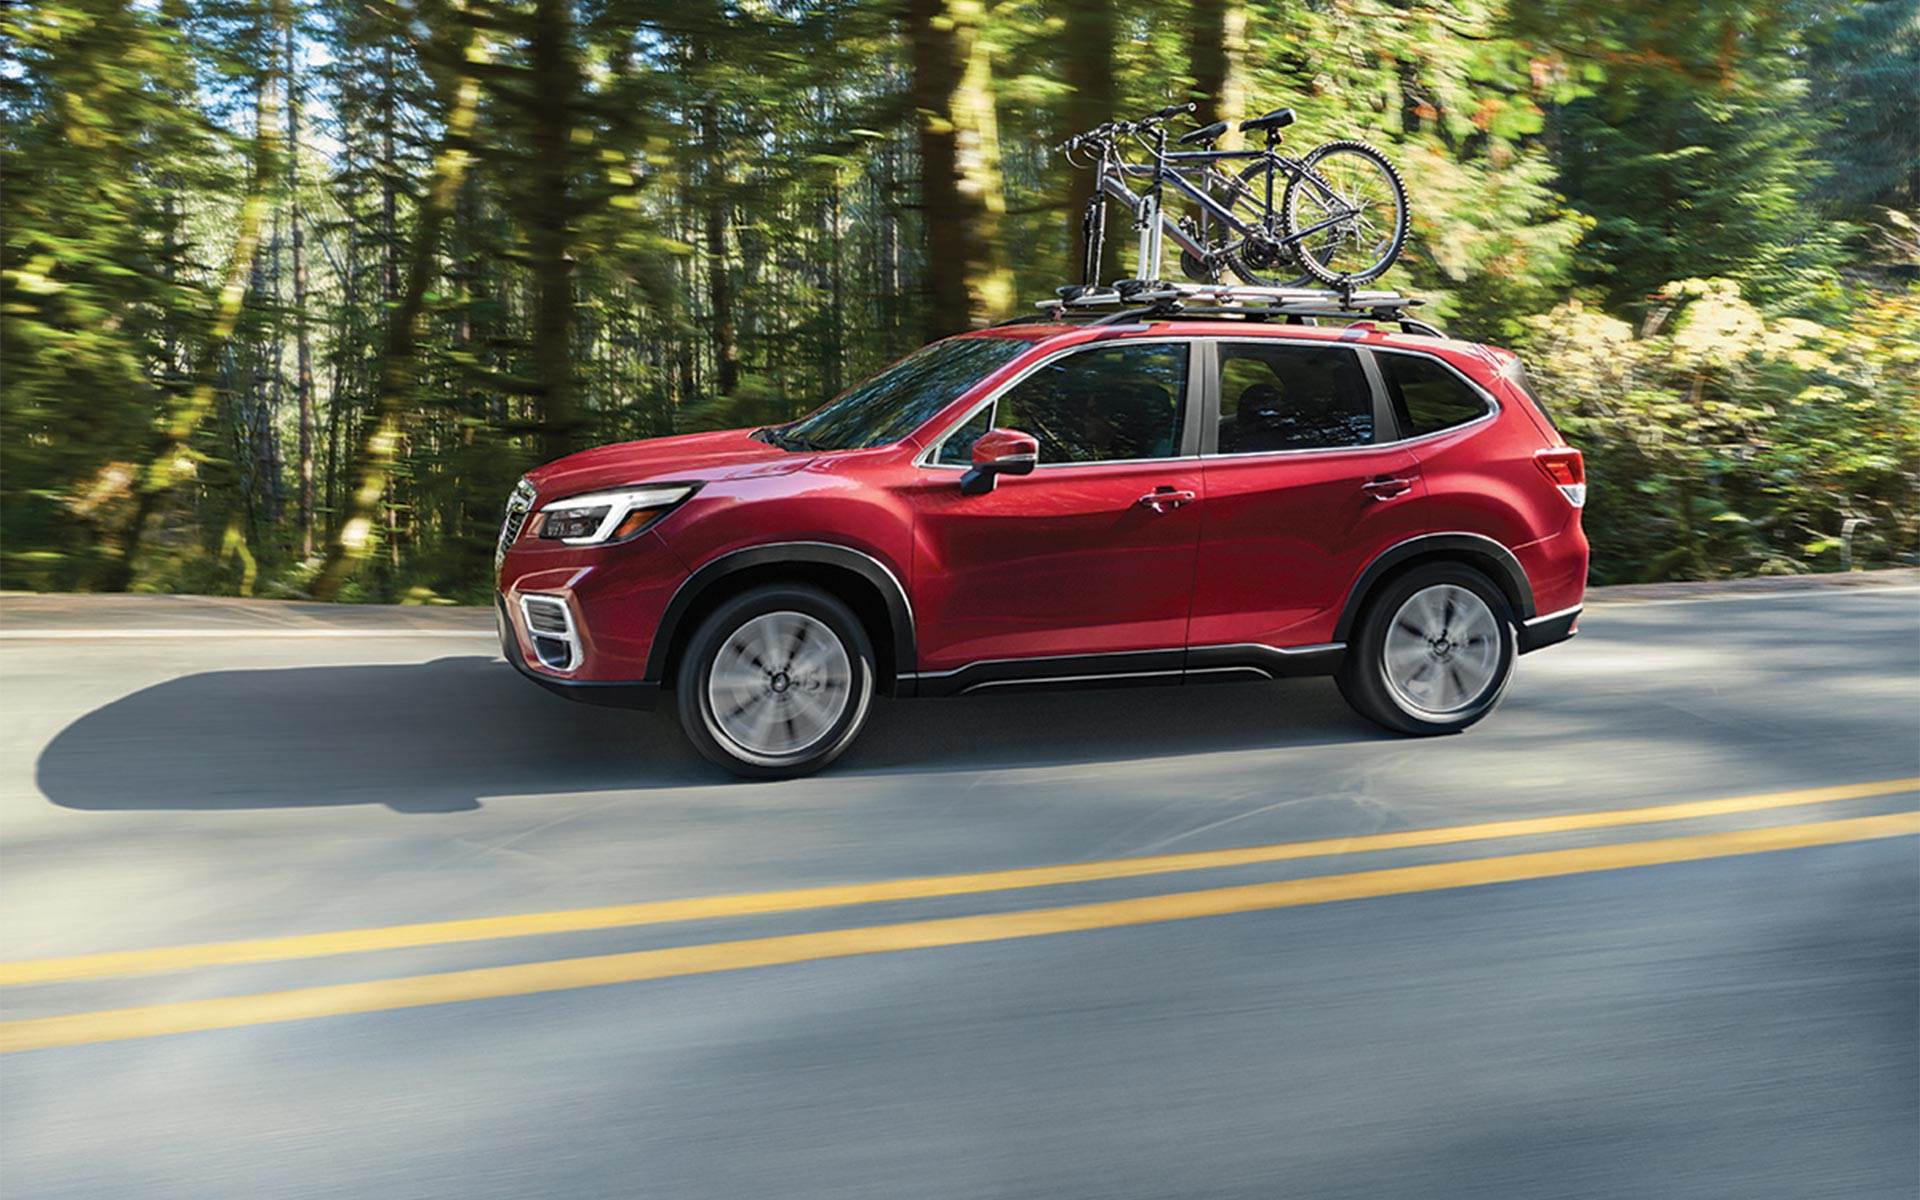 a red 2021 Subaru Forester driving on a scenic wooded road